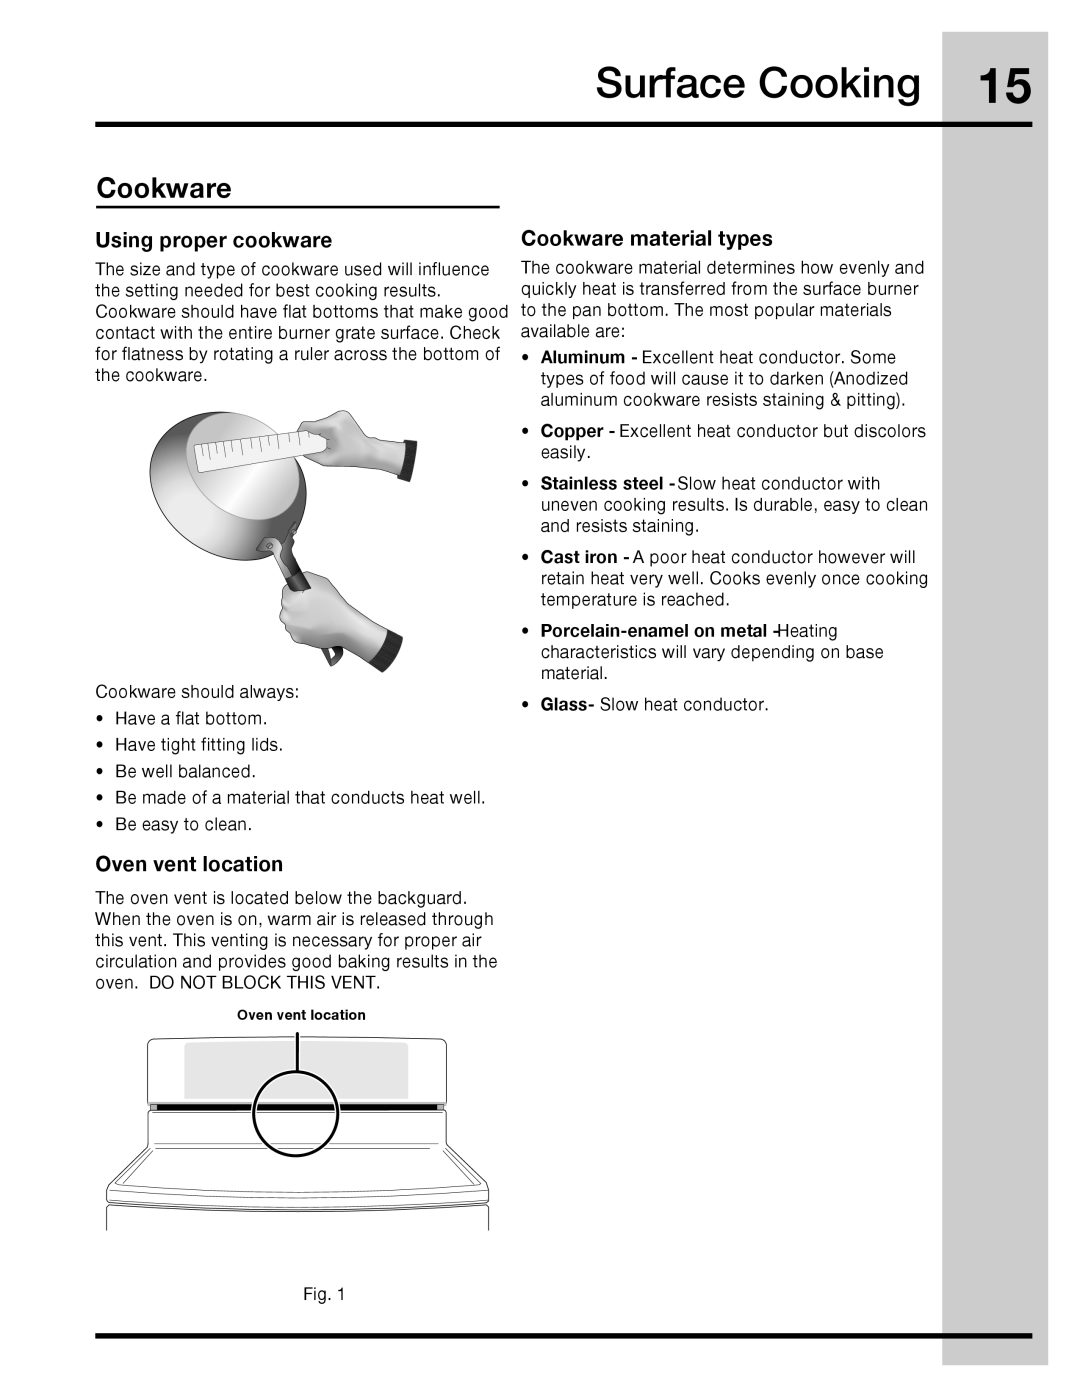 Electrolux 316471110 manual Surface Cooking, Using proper cookware, Oven vent location, Cookware material types 